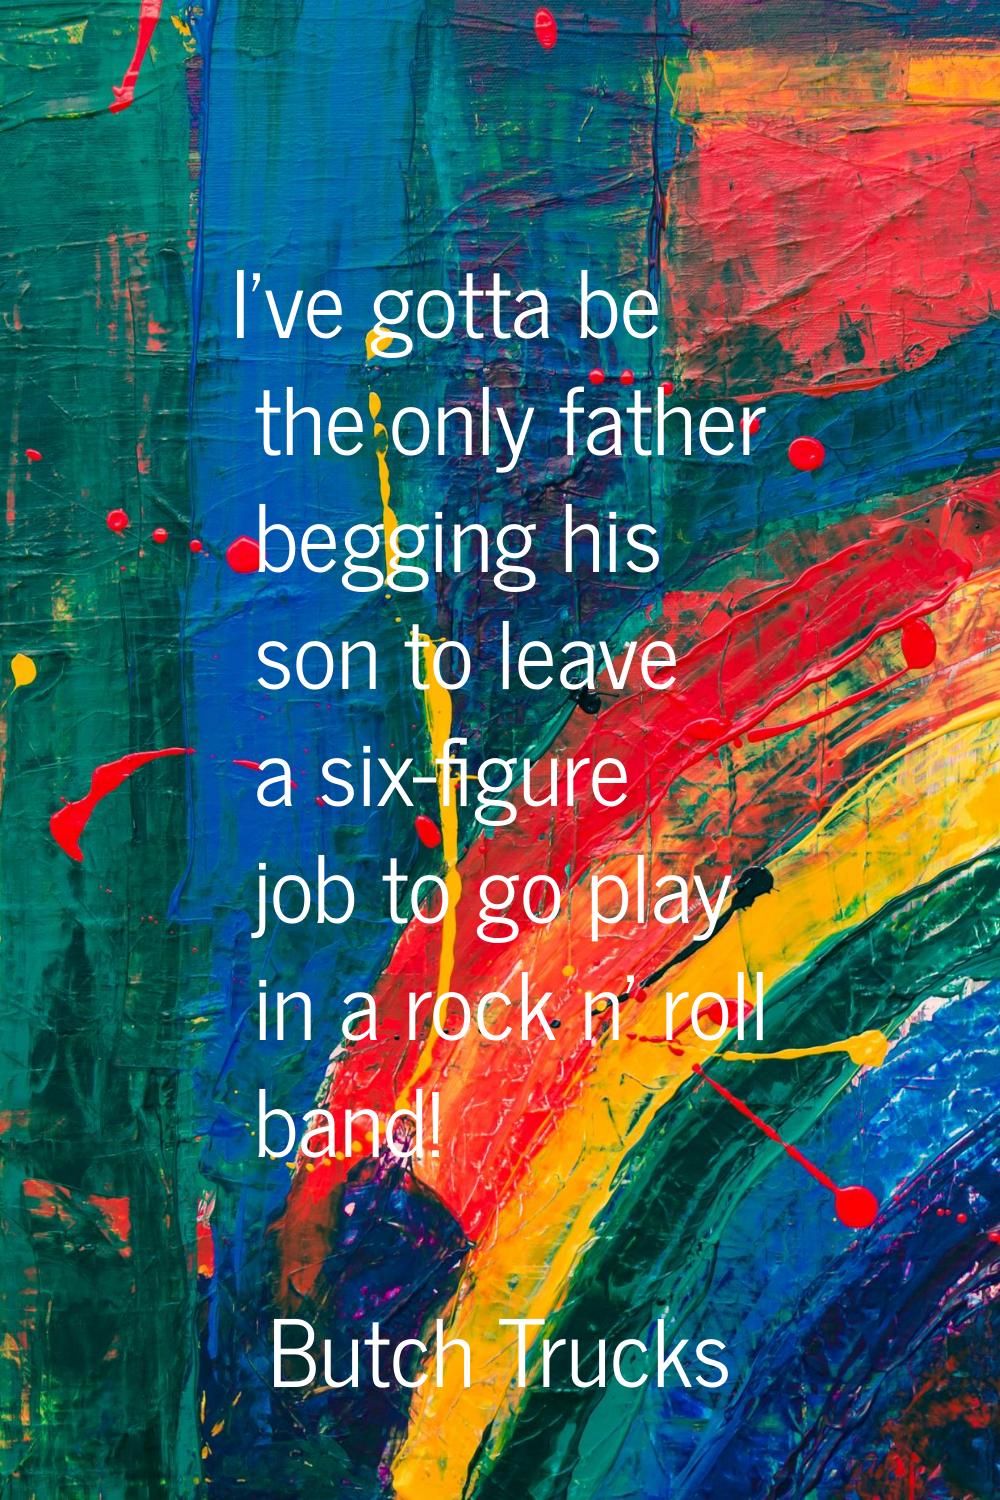 I've gotta be the only father begging his son to leave a six-figure job to go play in a rock n' rol